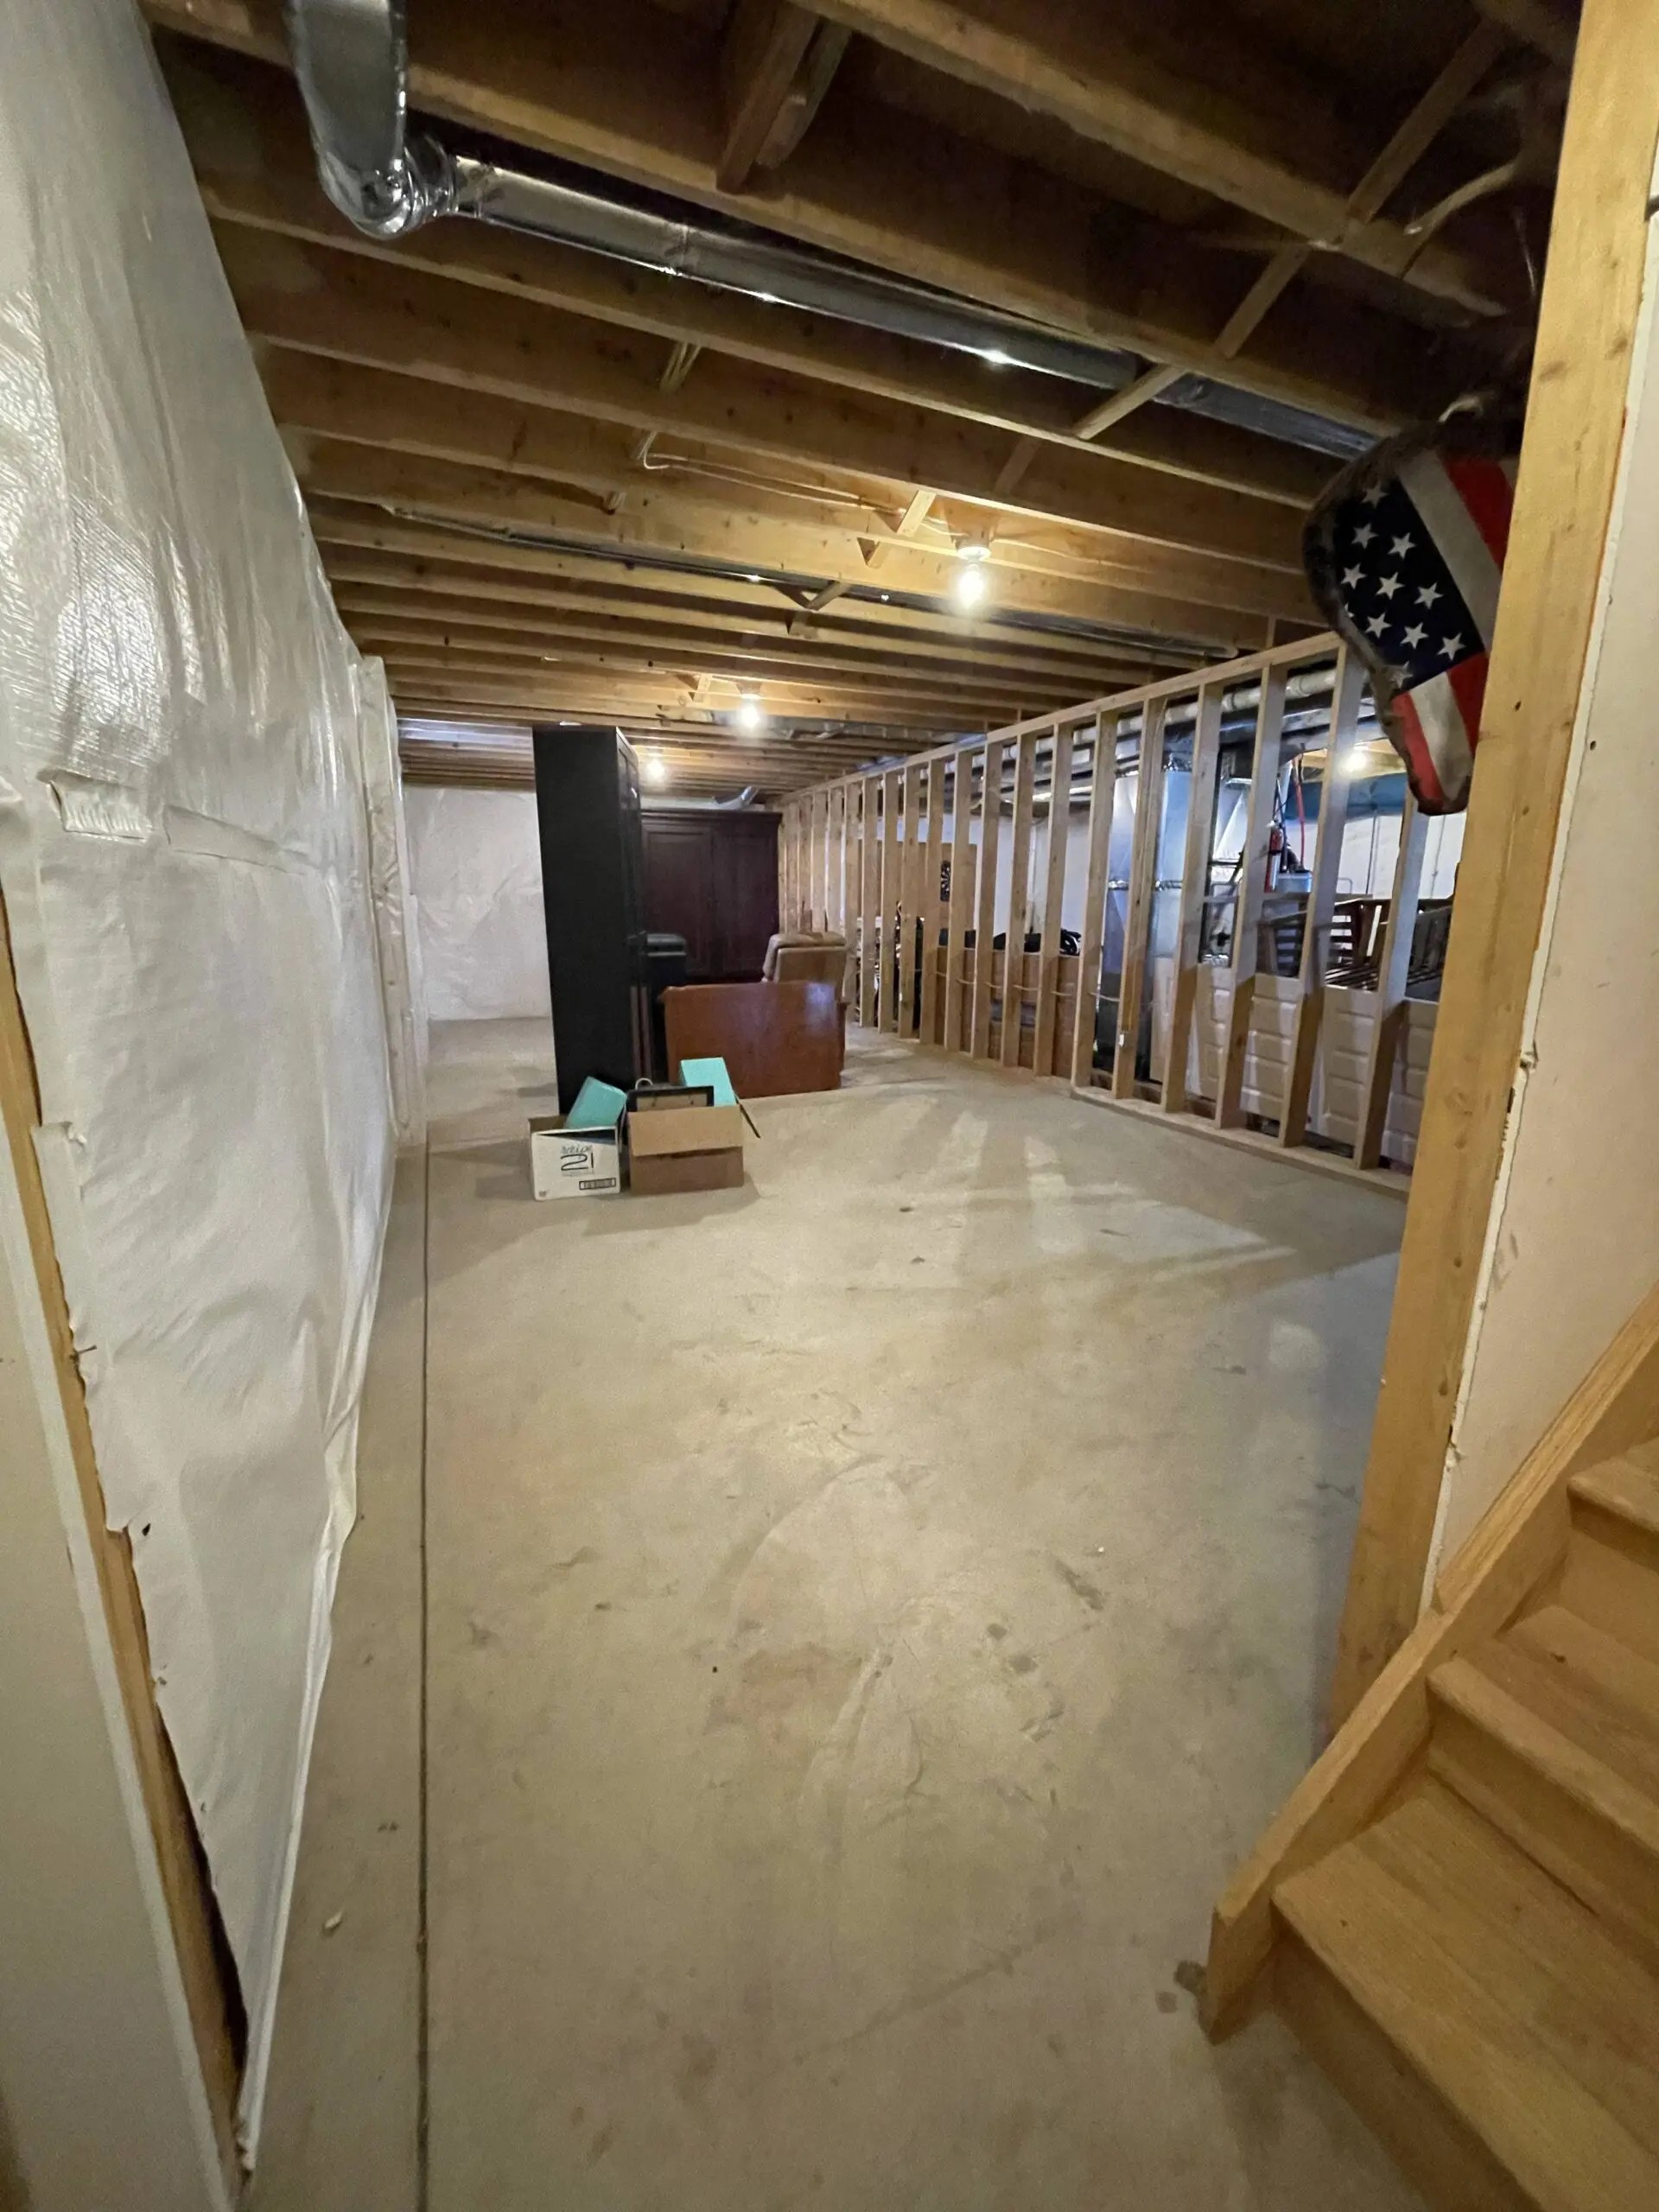 Image of the untreated concrete floor in the basement before renovation